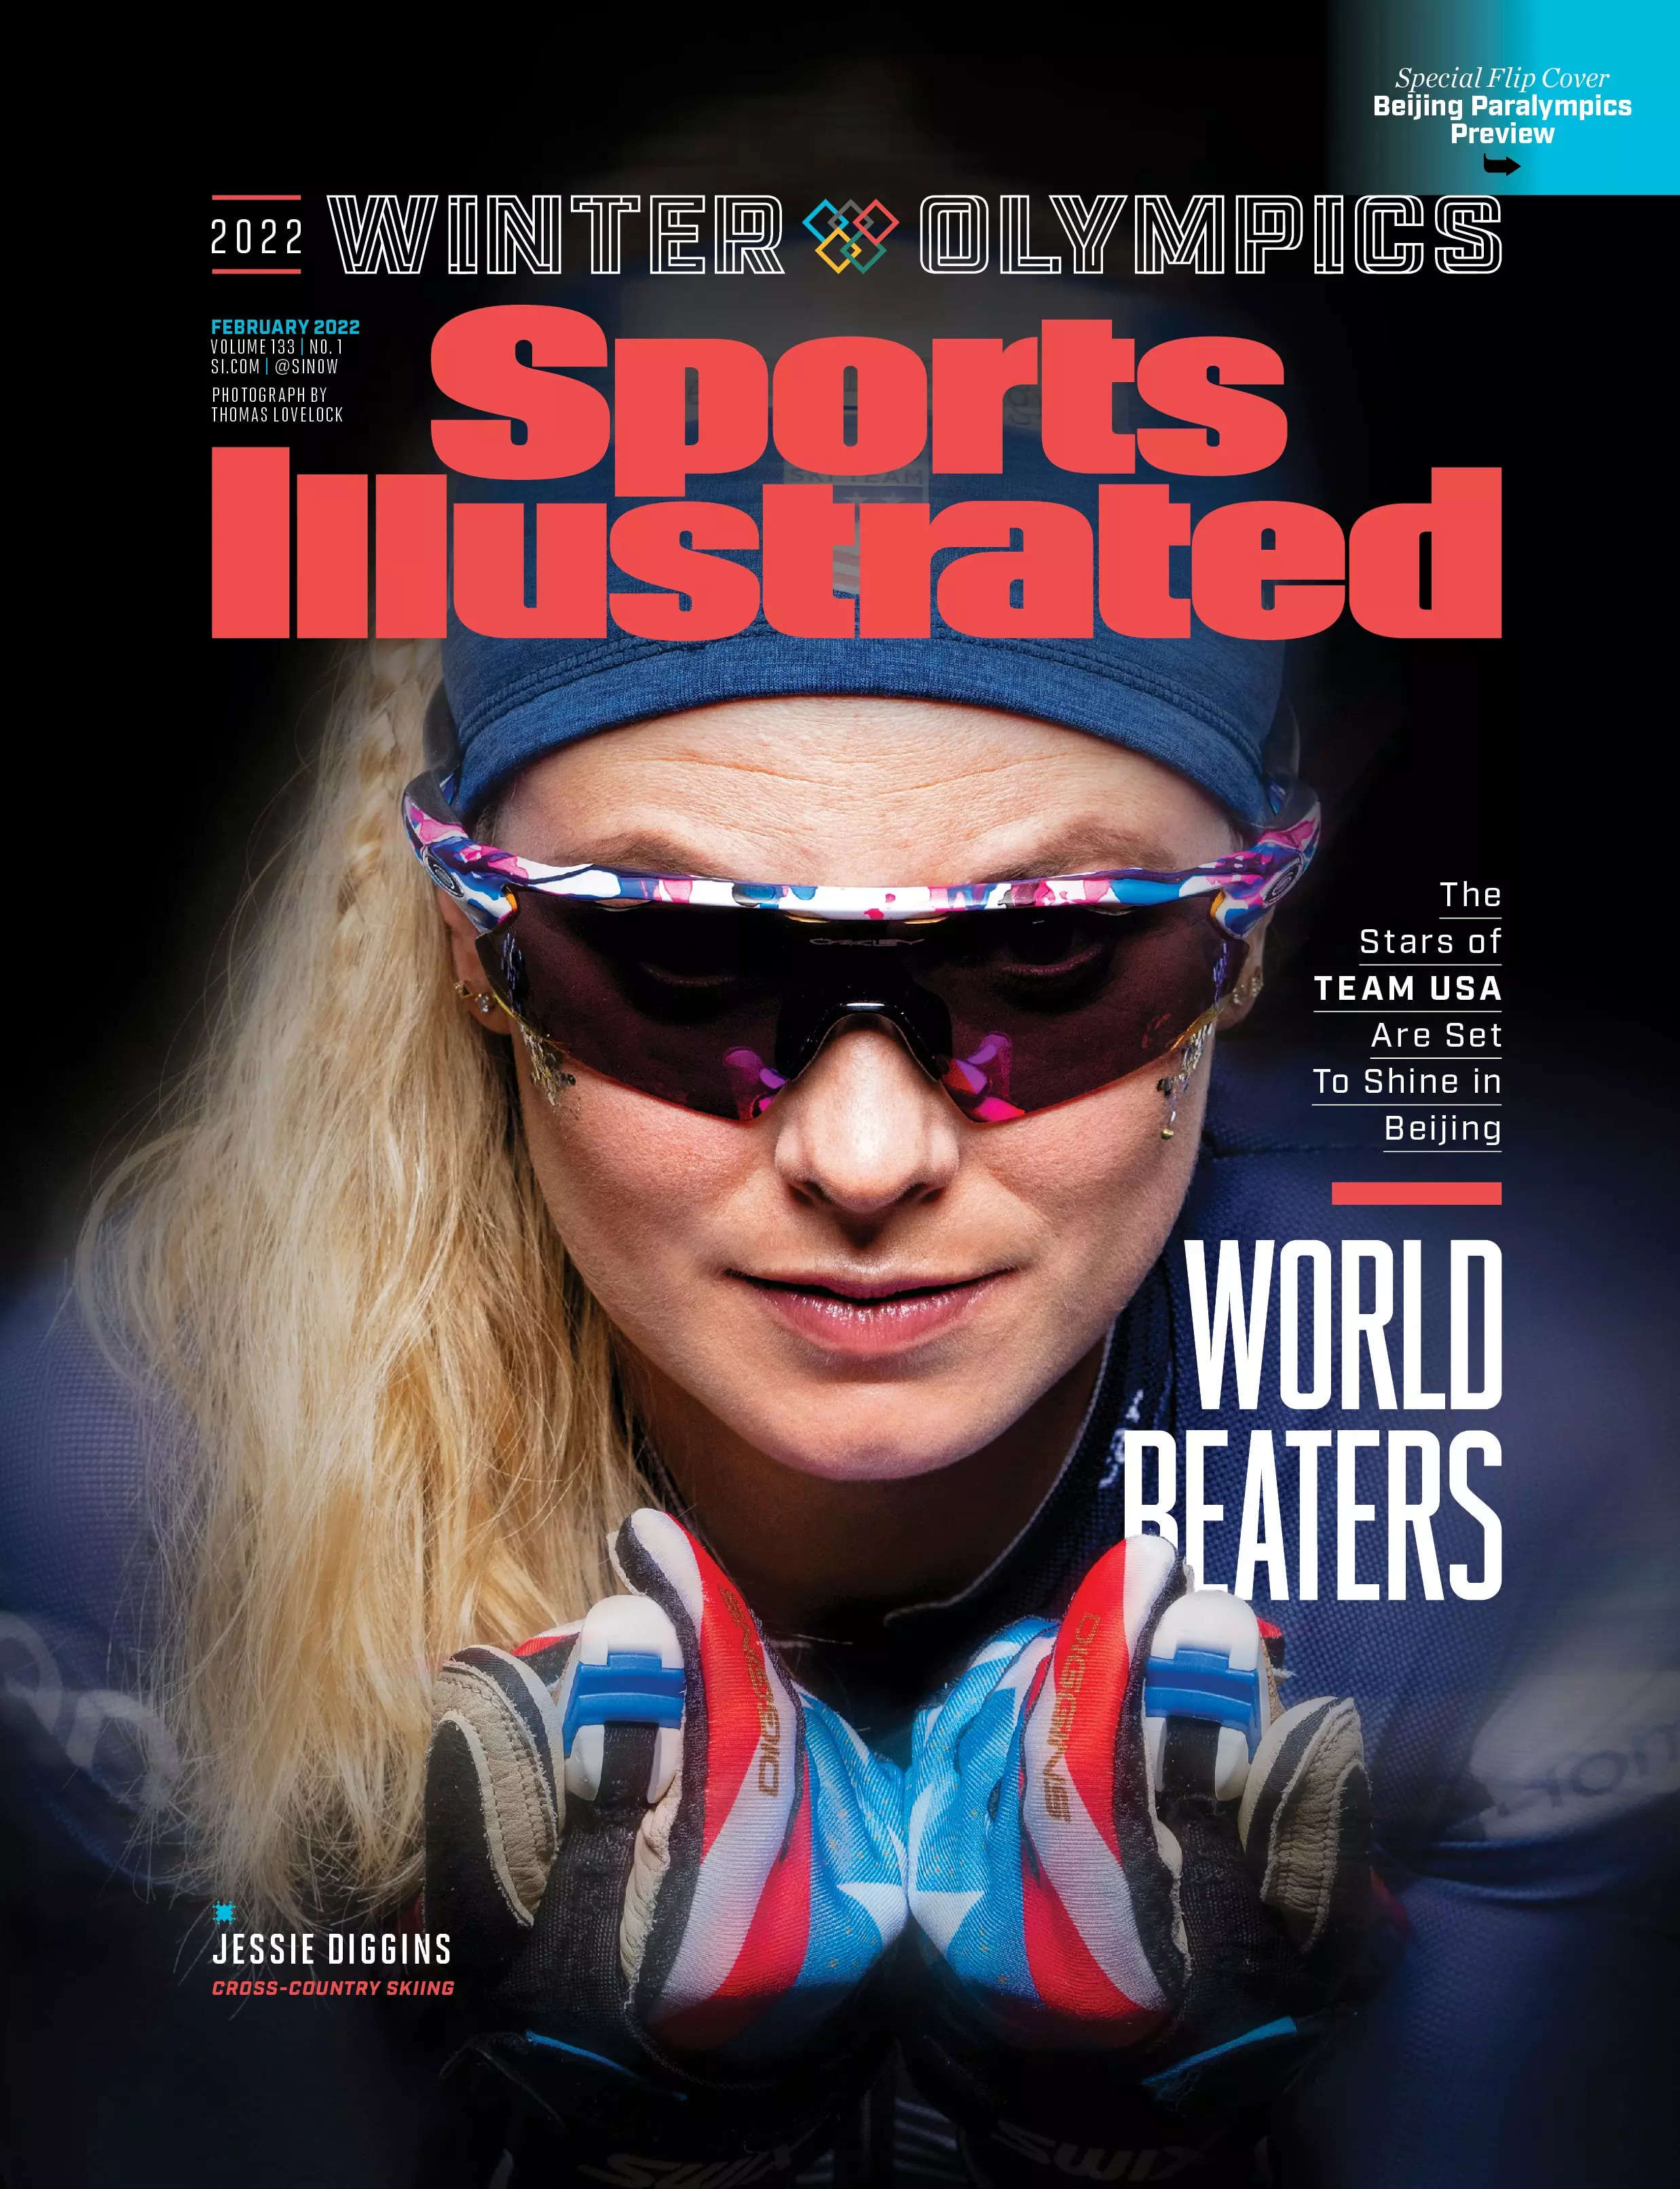 Jessie Diggins is one of four cover athletes for Sports Illustrated